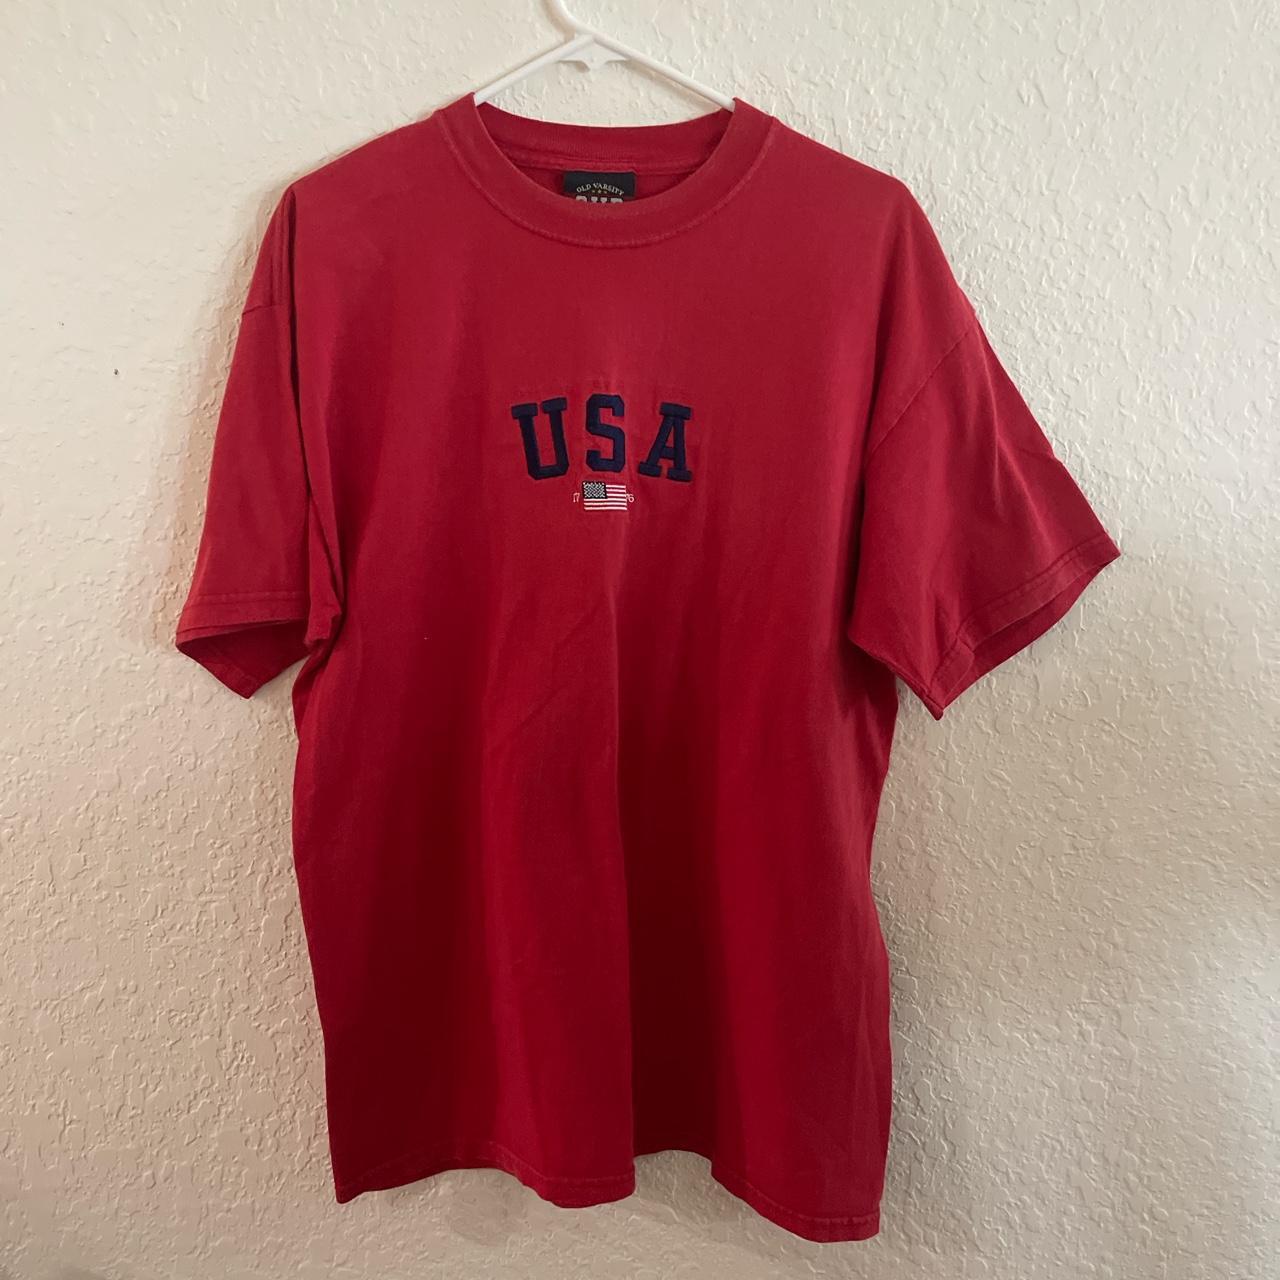 Red USA t-shirt great fit for multiple occasions 🏷️ - Depop